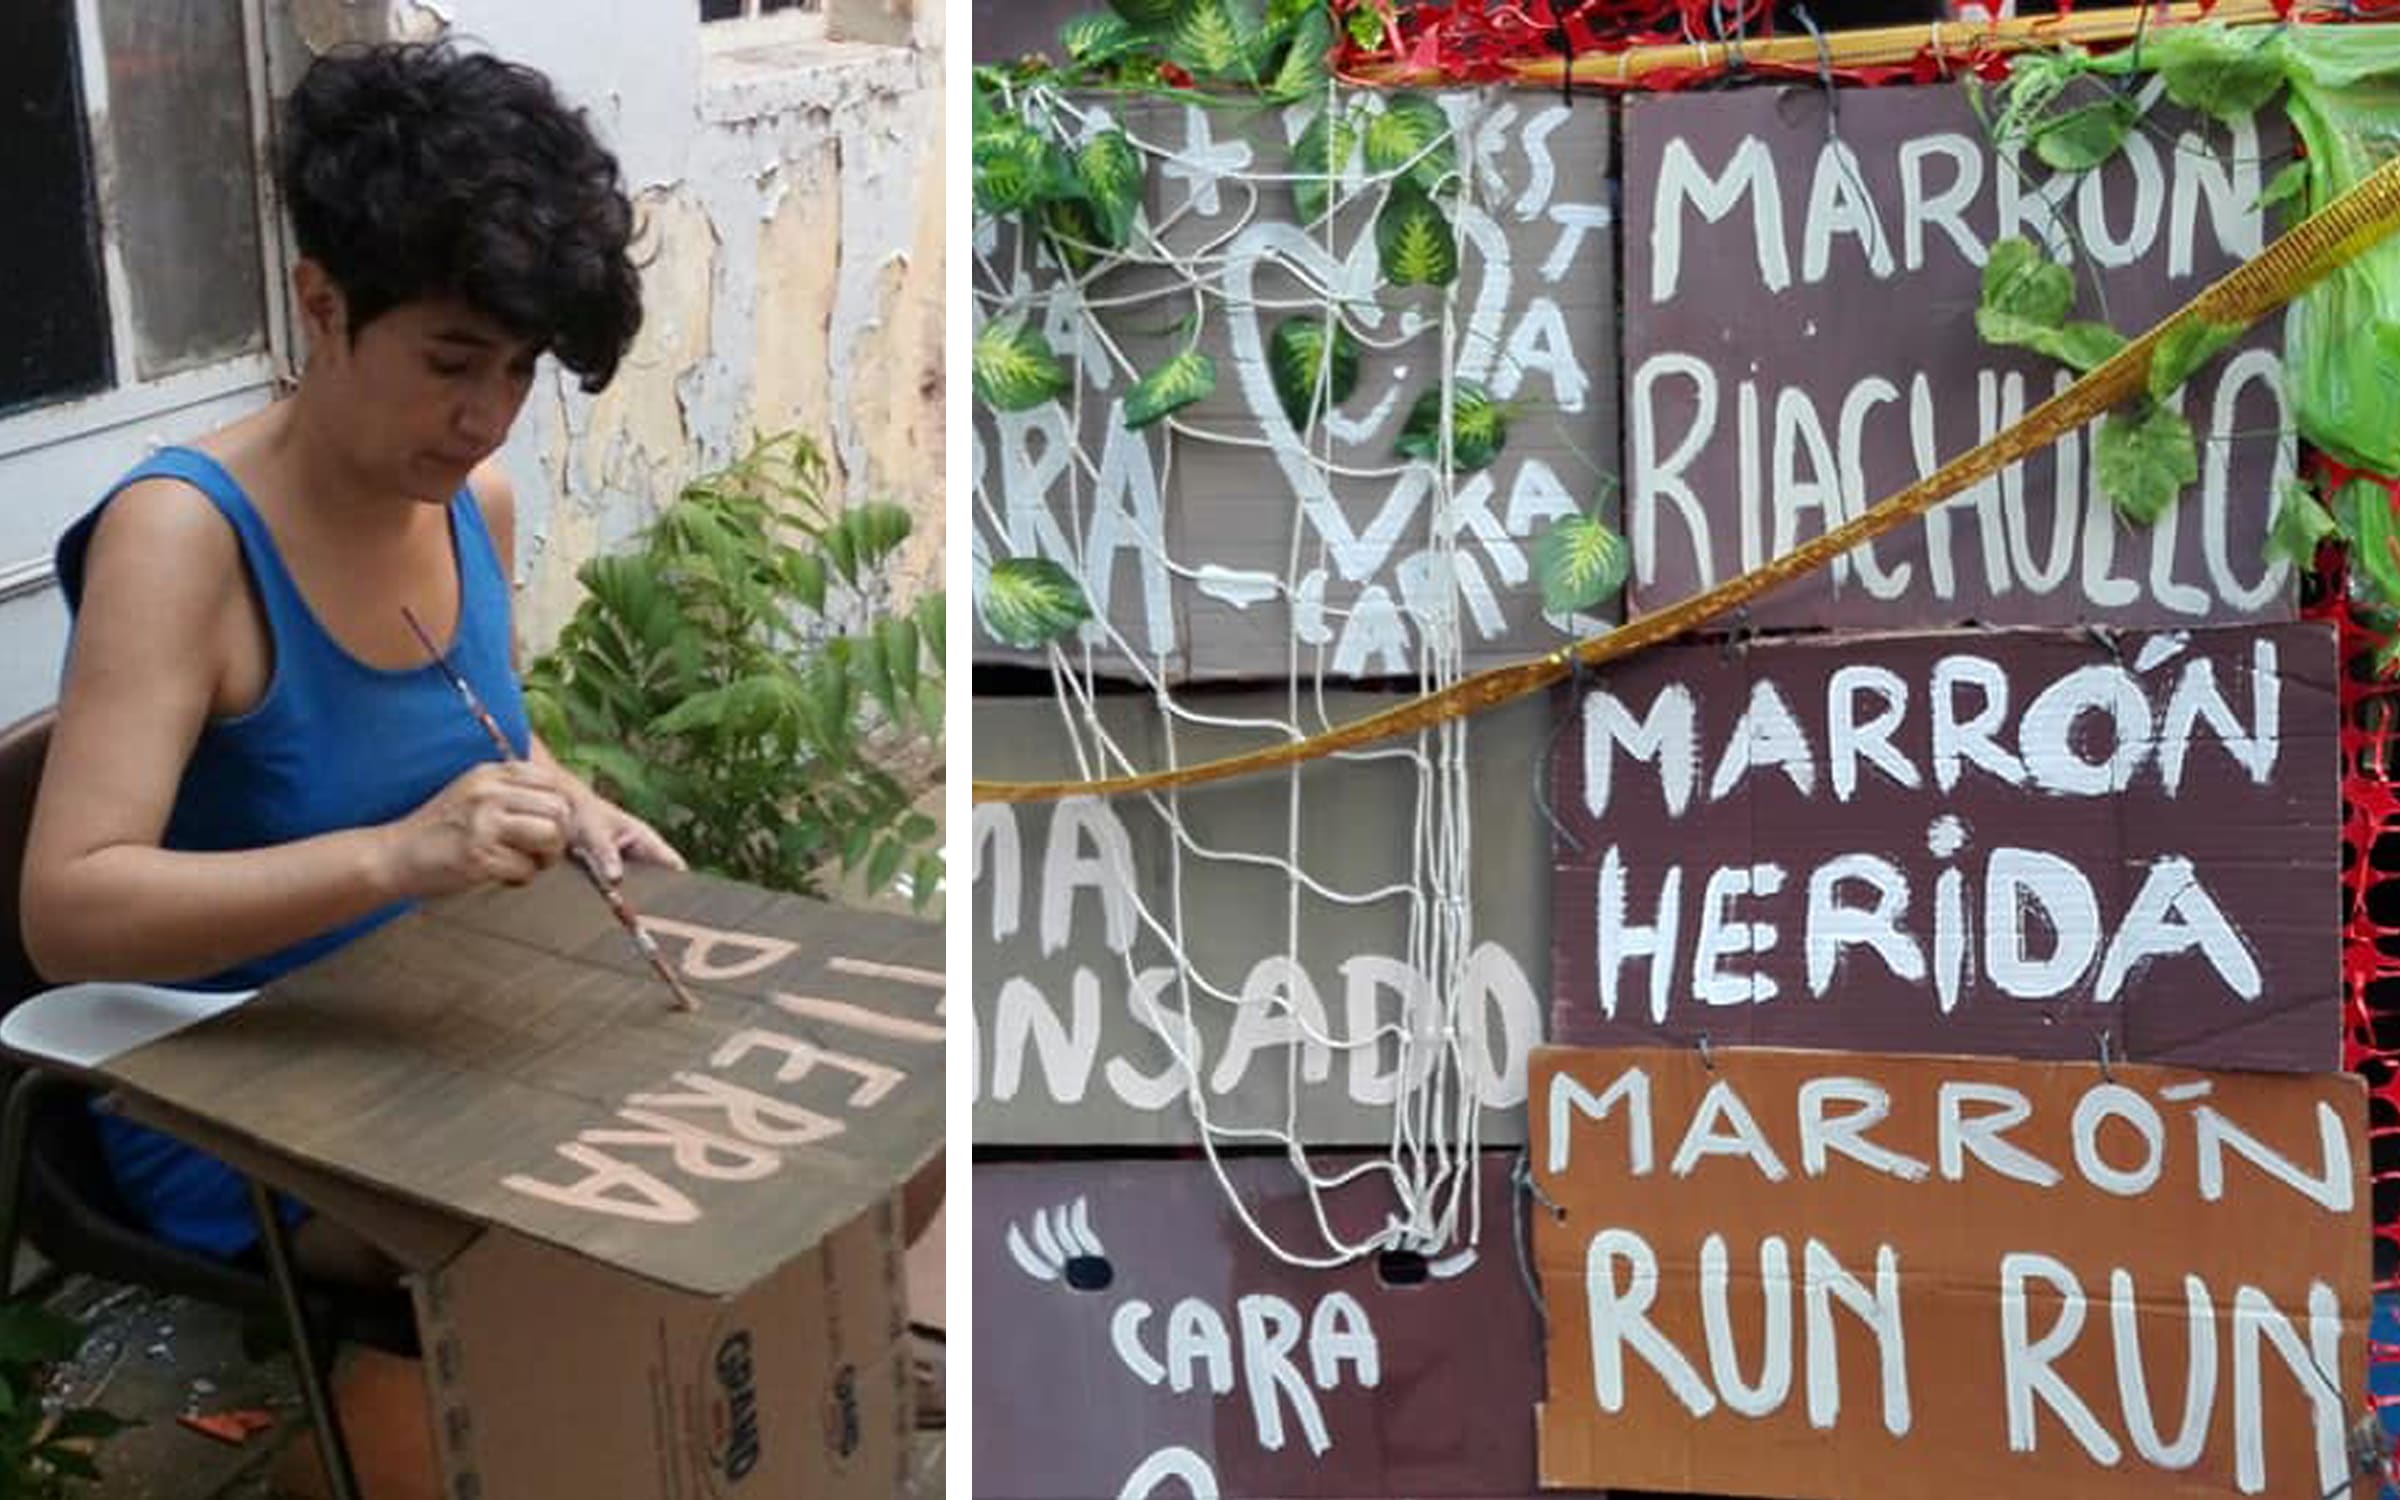 Left: Mariela Scafati painting a sign. Right: Cromoactivismo partnered with the queer activists Columna Orgullo en Lucha during the Pride March in Buenos Aires, 2017. Image courtesy of the artists.